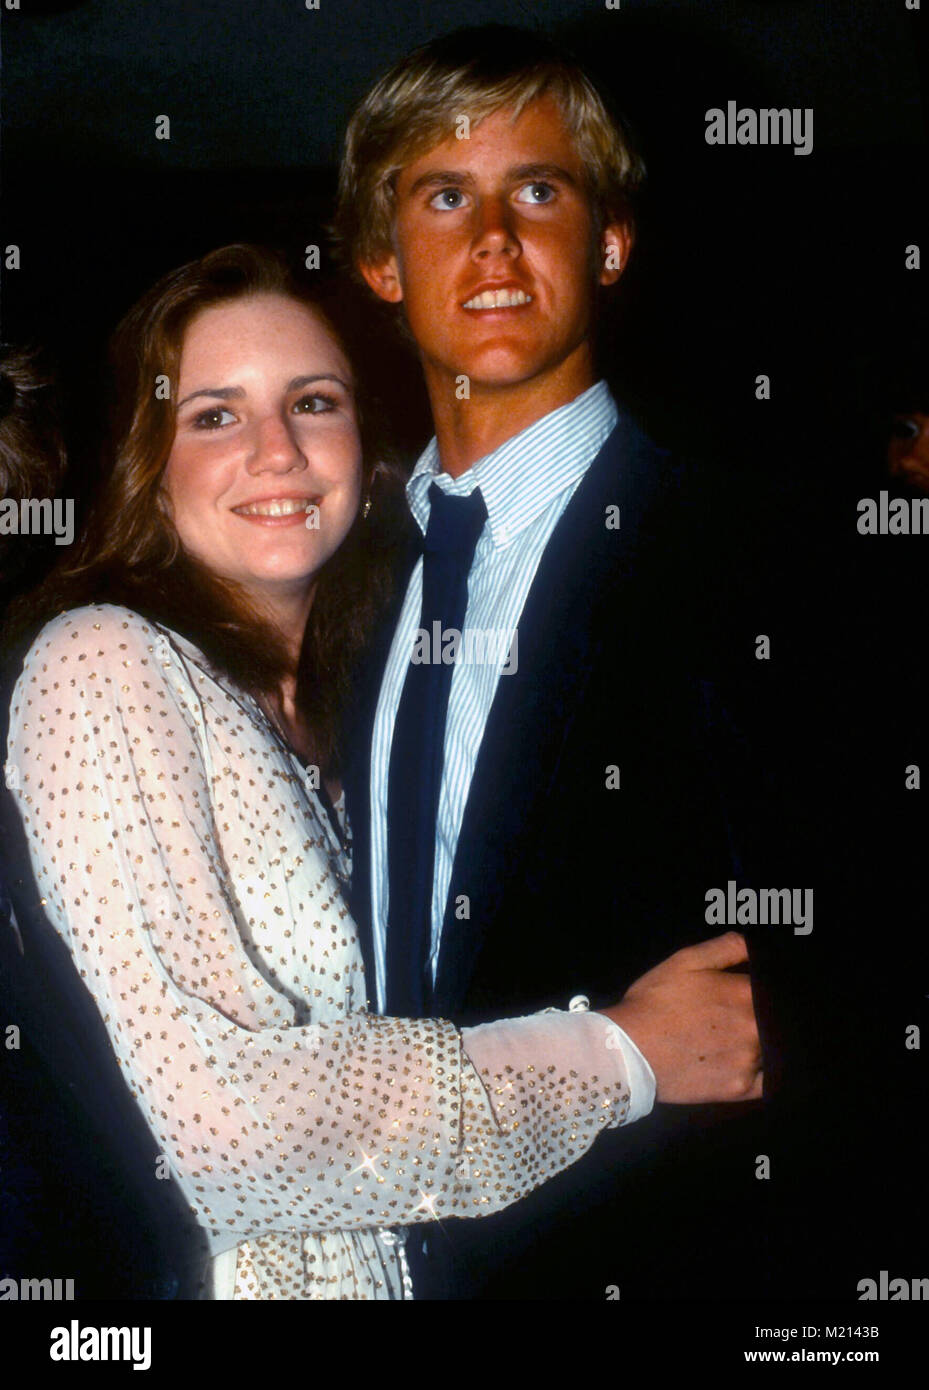 WEST HOLLYWOOD, CA - MAY 17: Actress Melissa Gilbert and actor Michael  Landon Jr. attend NBC party